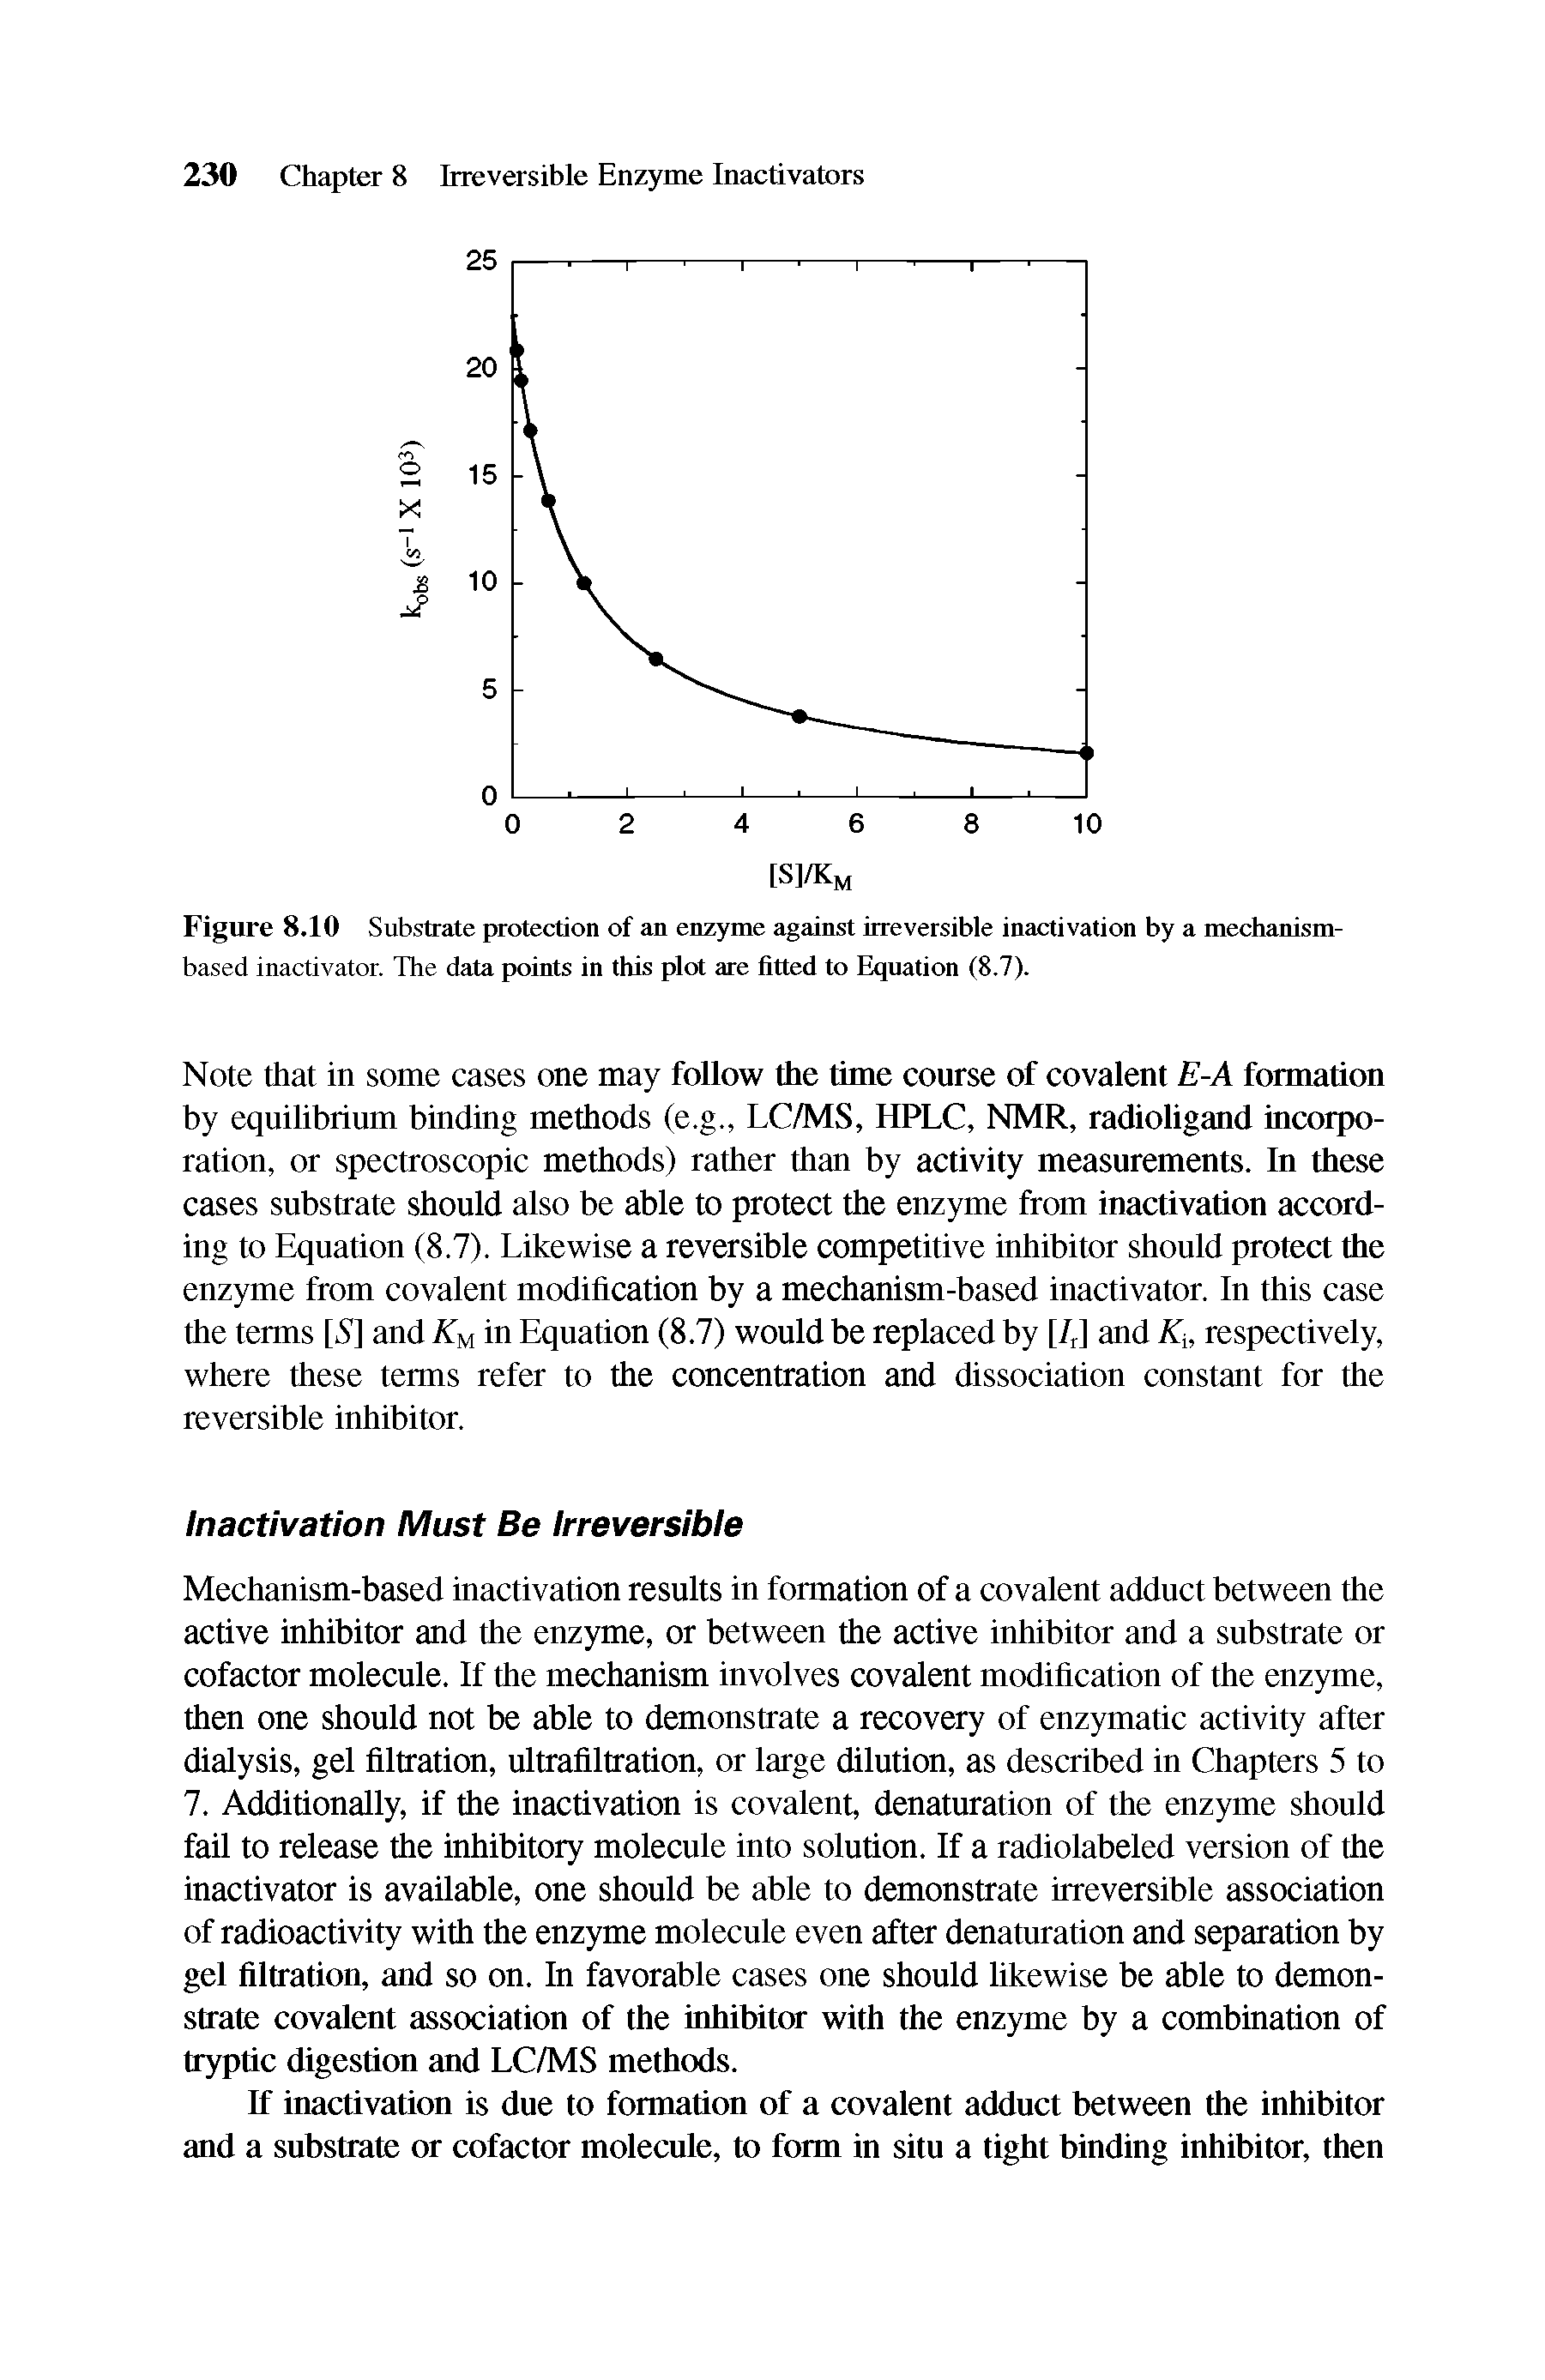 Figure 8.10 Substrate protection of an enzyme against irreversible inactivation by a mechanism-based inactivator. The data points in this plot are fitted to Equation (8.7).